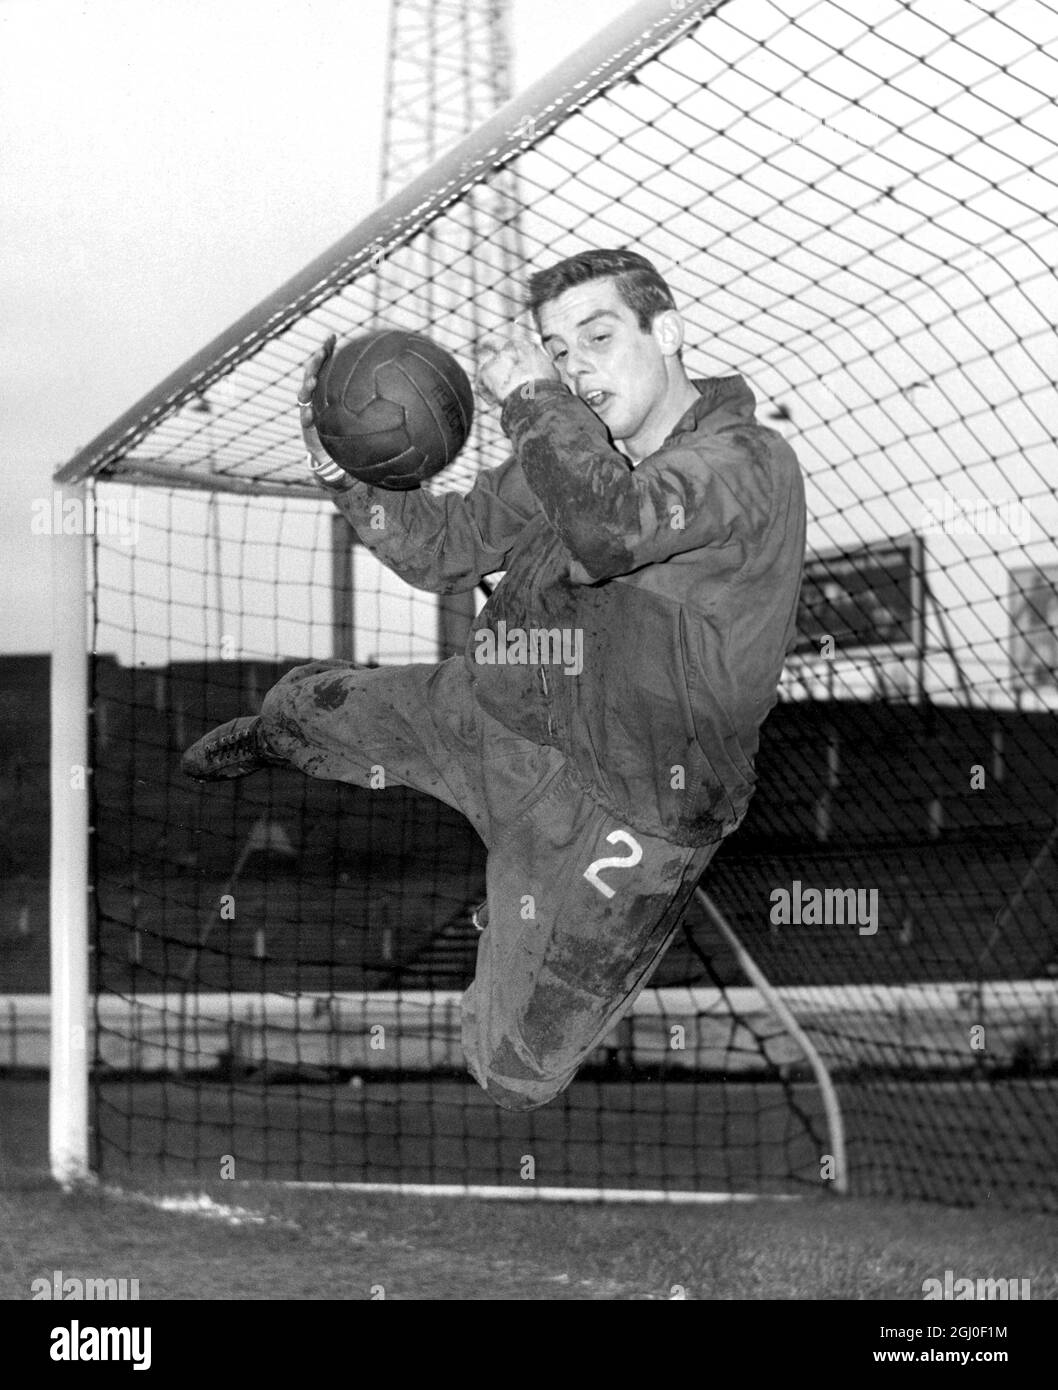 Nineteen year old Chelsea goalkeeper John Dunn, one of Chelsea's two young goalkeepers makes an acrobatic save during training at Stamford Bridge. Dunn is set to make his FA Cup debut against Tottenham Hotspur at White Hart Lane on Saturday because Peter Bonetti has a fractured finger. 31st December 1963. Stock Photo